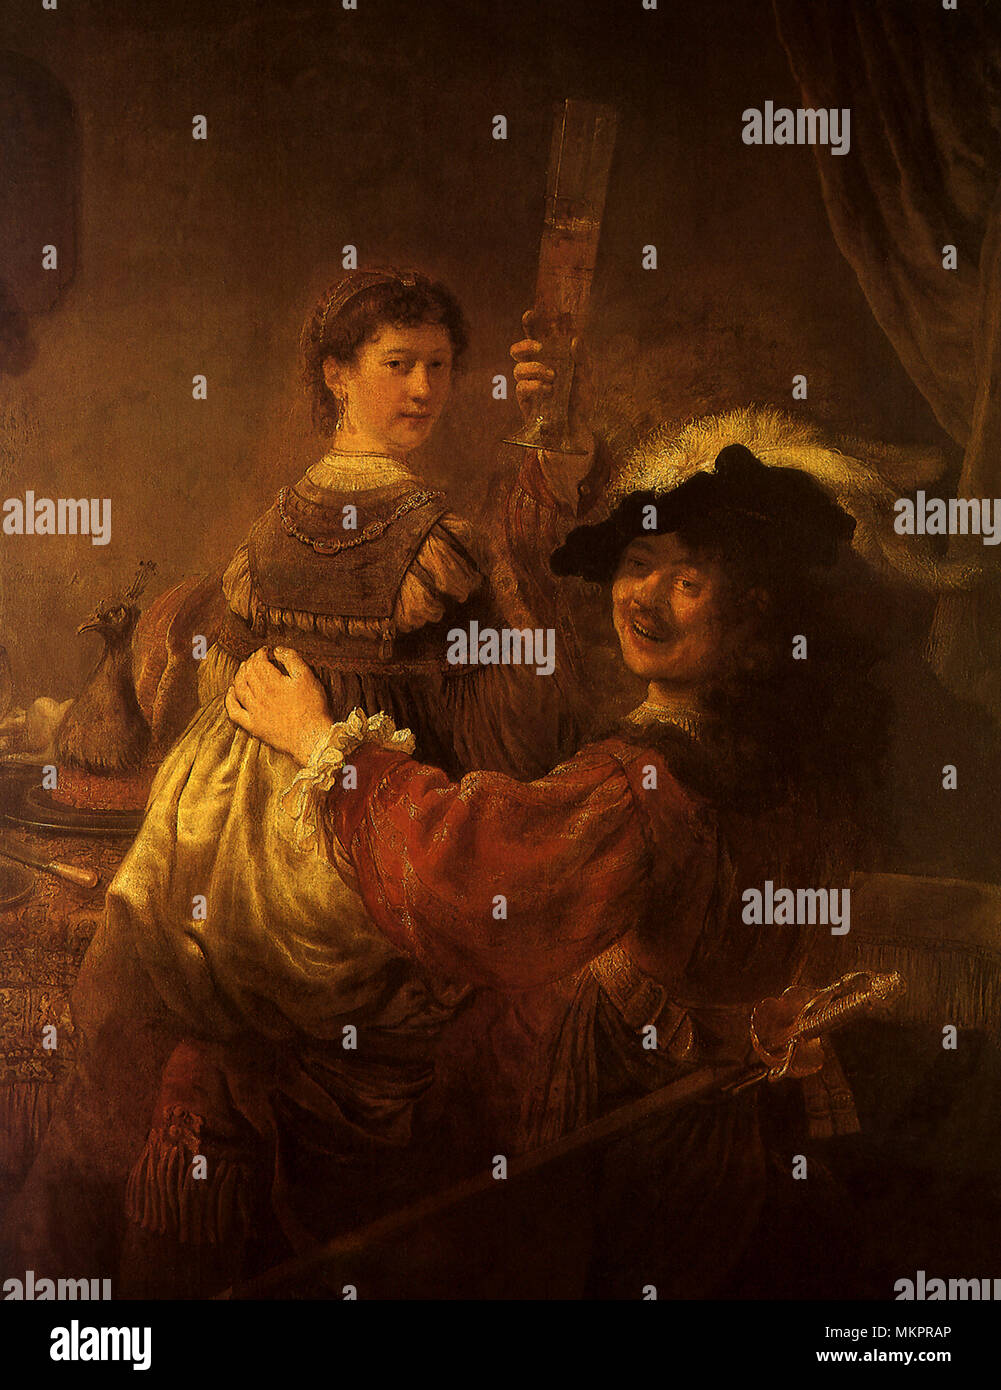 Rembrandt and Saskia in the Scene of the Prodigal Son Stock Photo